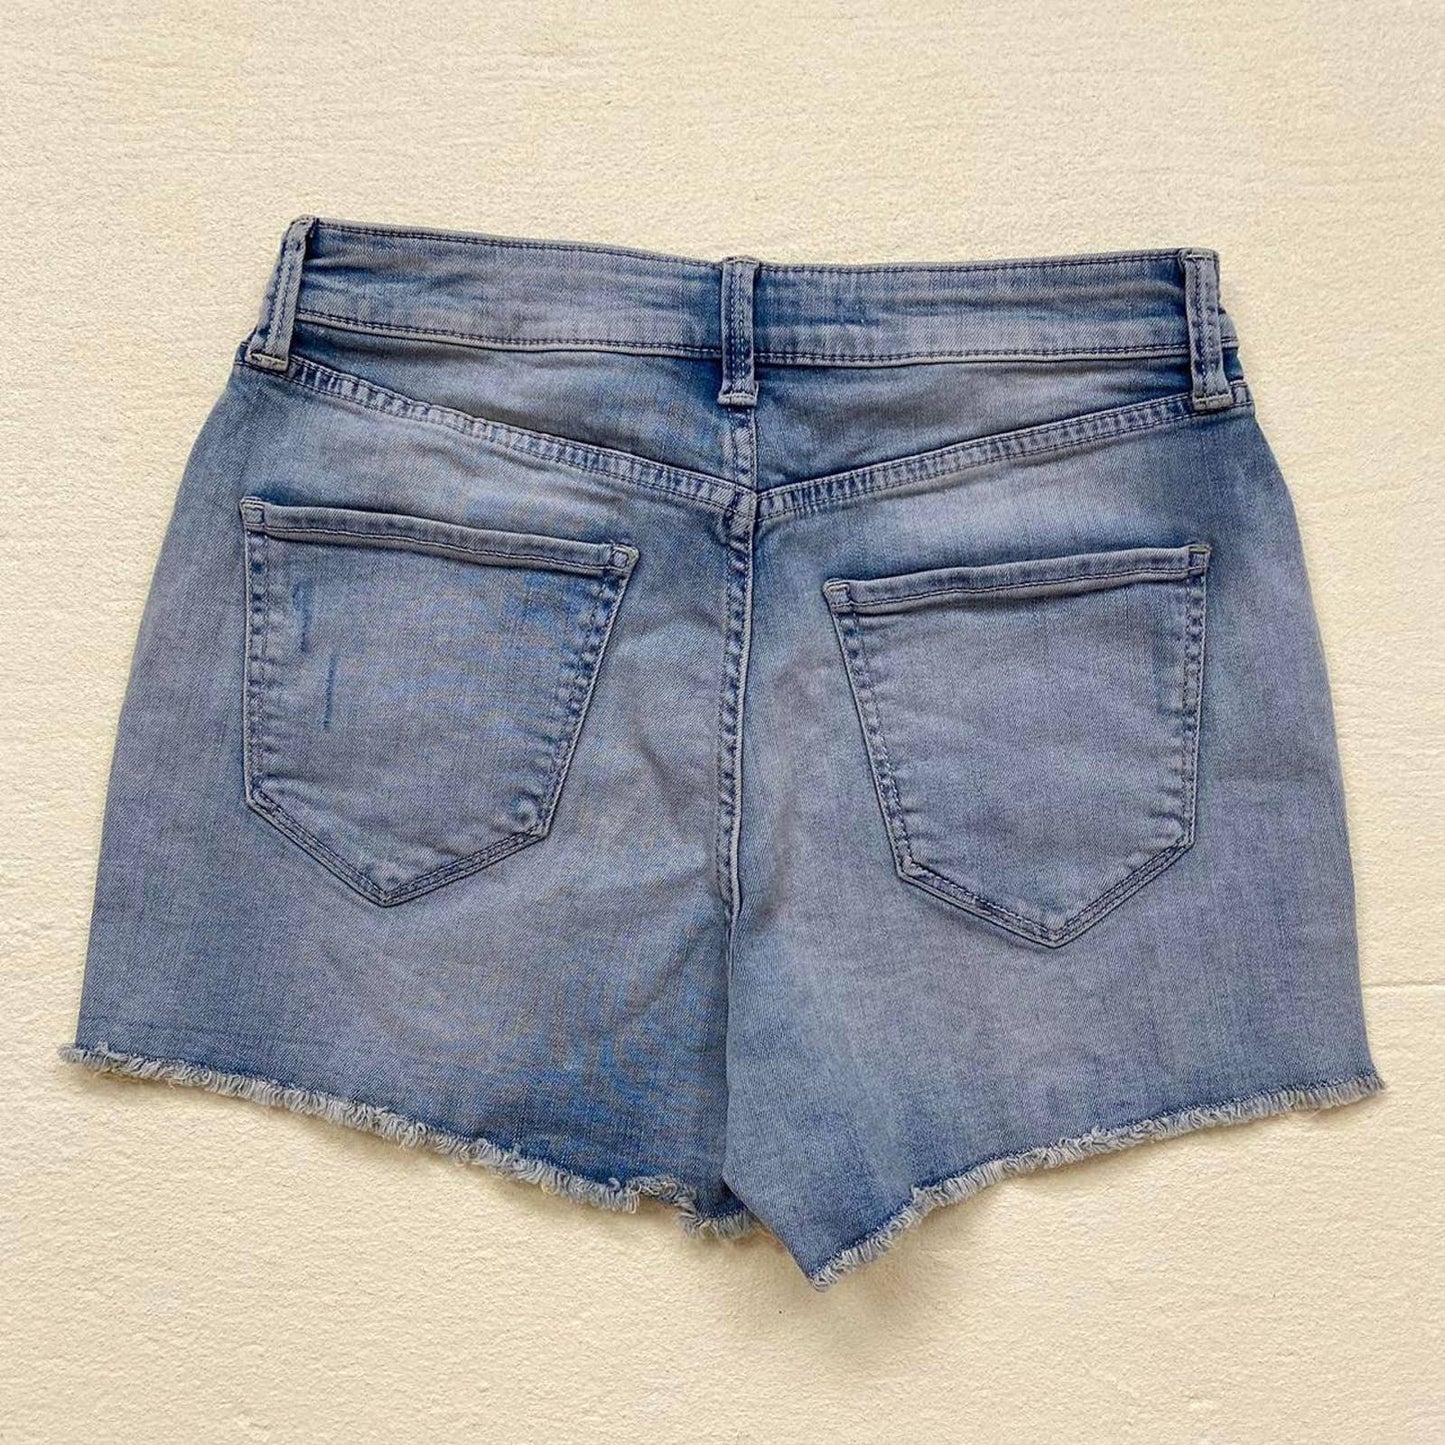 Preowned Arizona Jean Co Embroidered Denim Shorts, Juniors Size 7